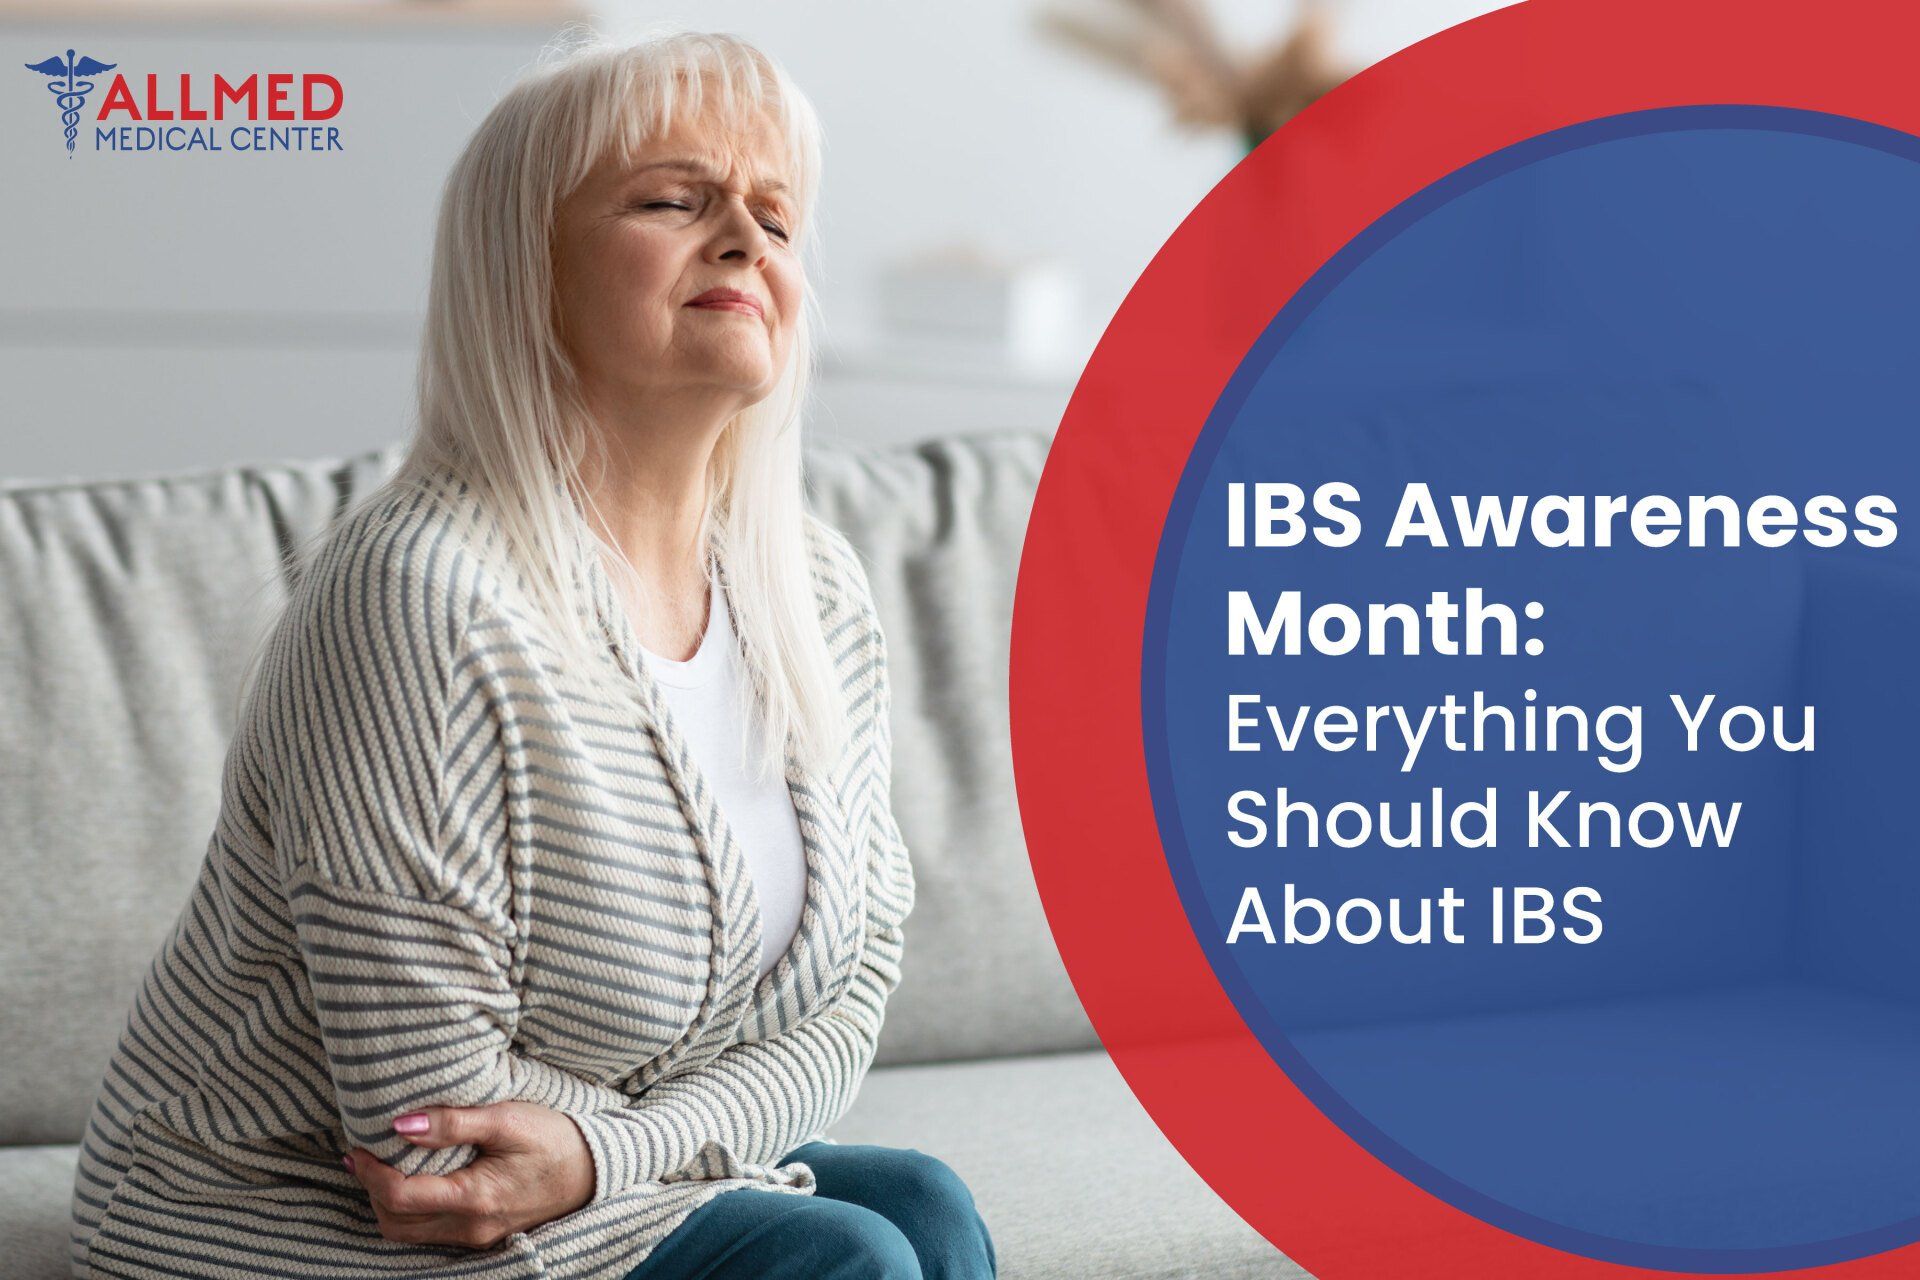 IBS Awareness Month: Everything You Should Know About IBS